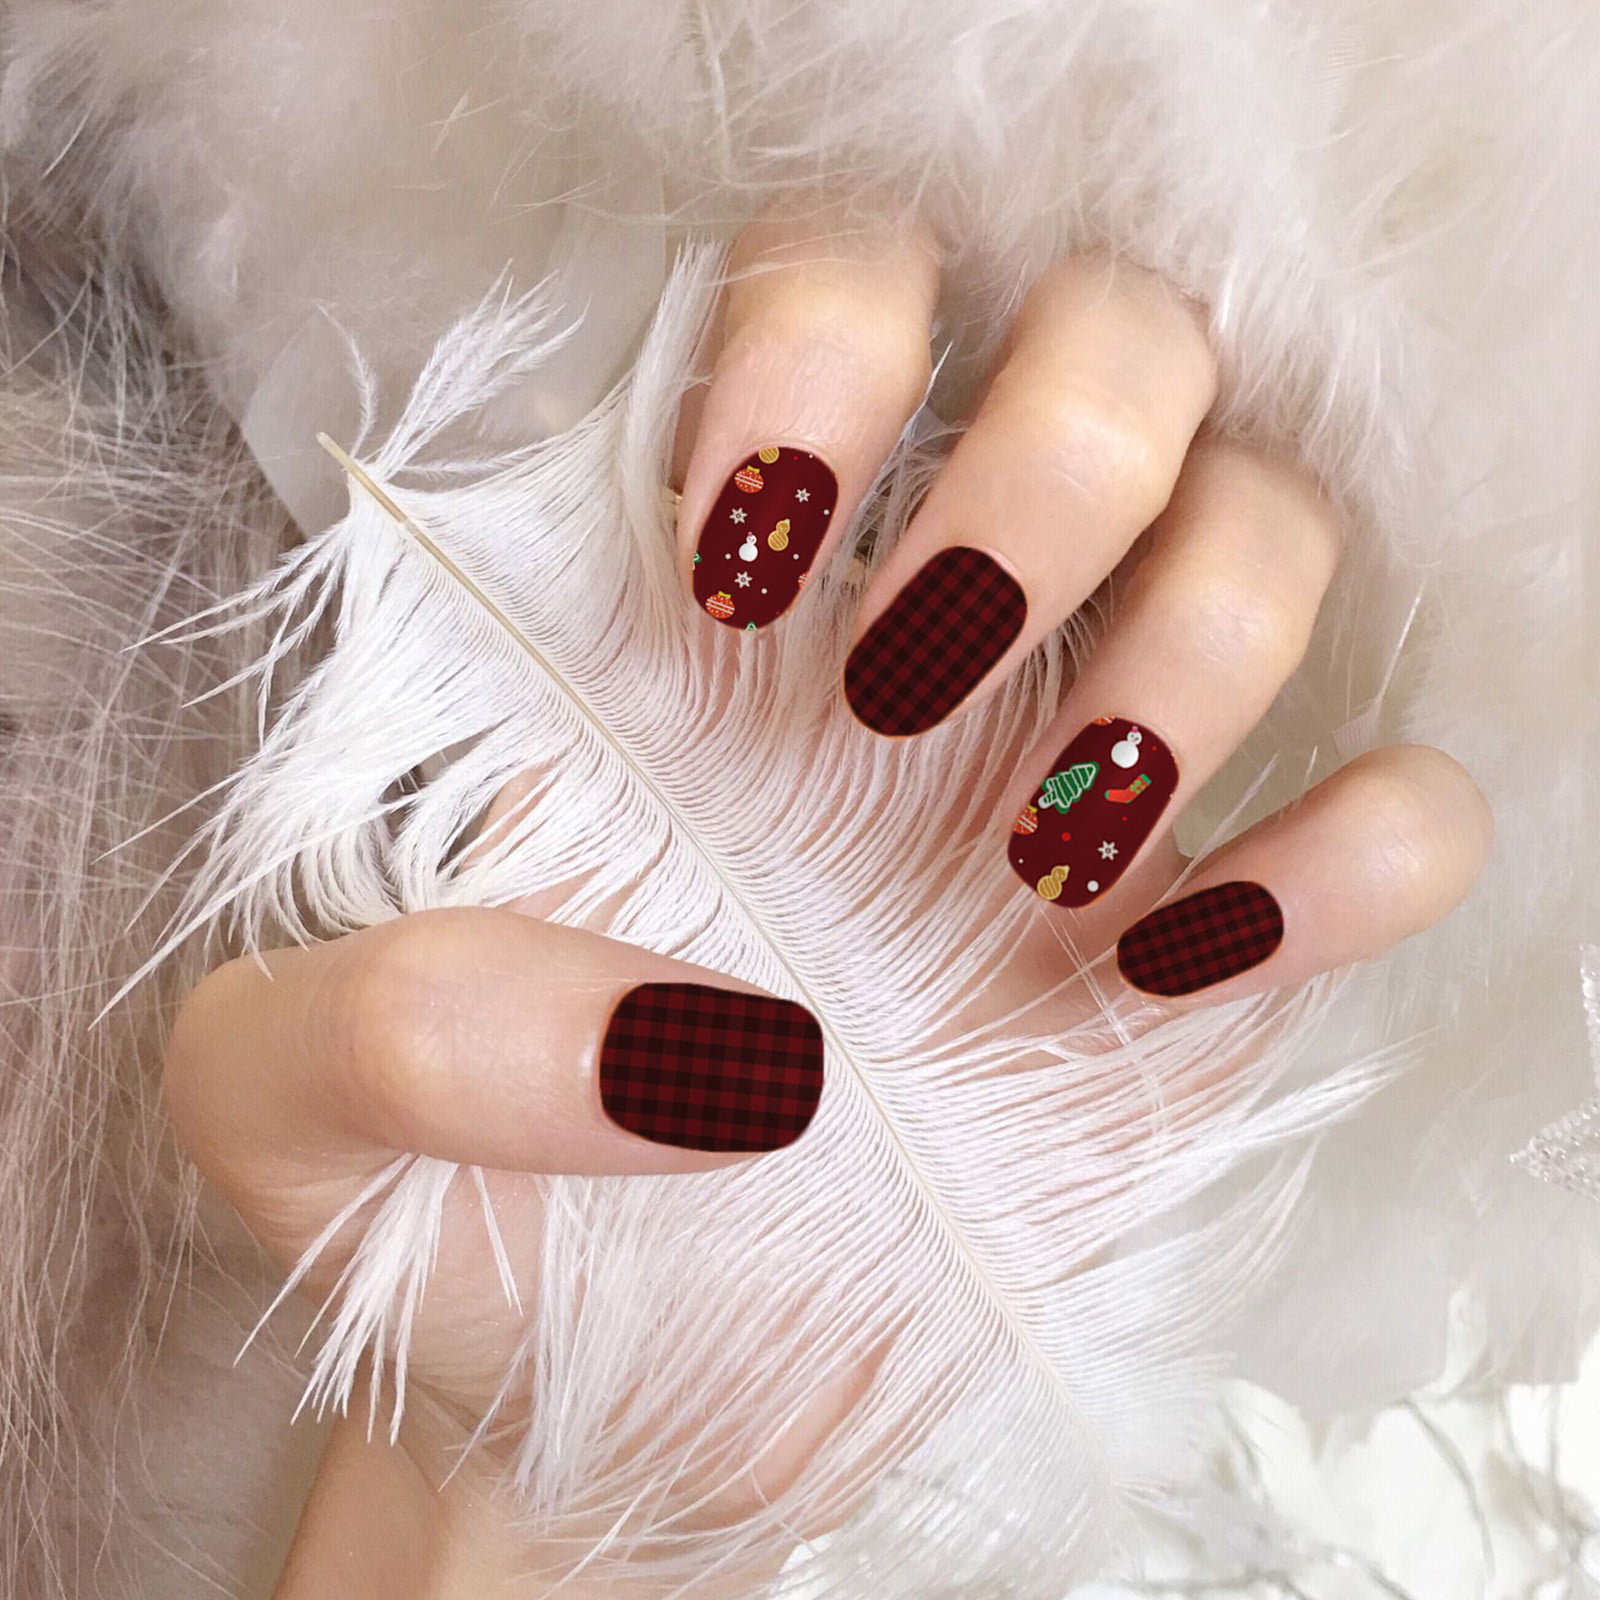 Can You Answer These 10 Questions On Nail Art? |